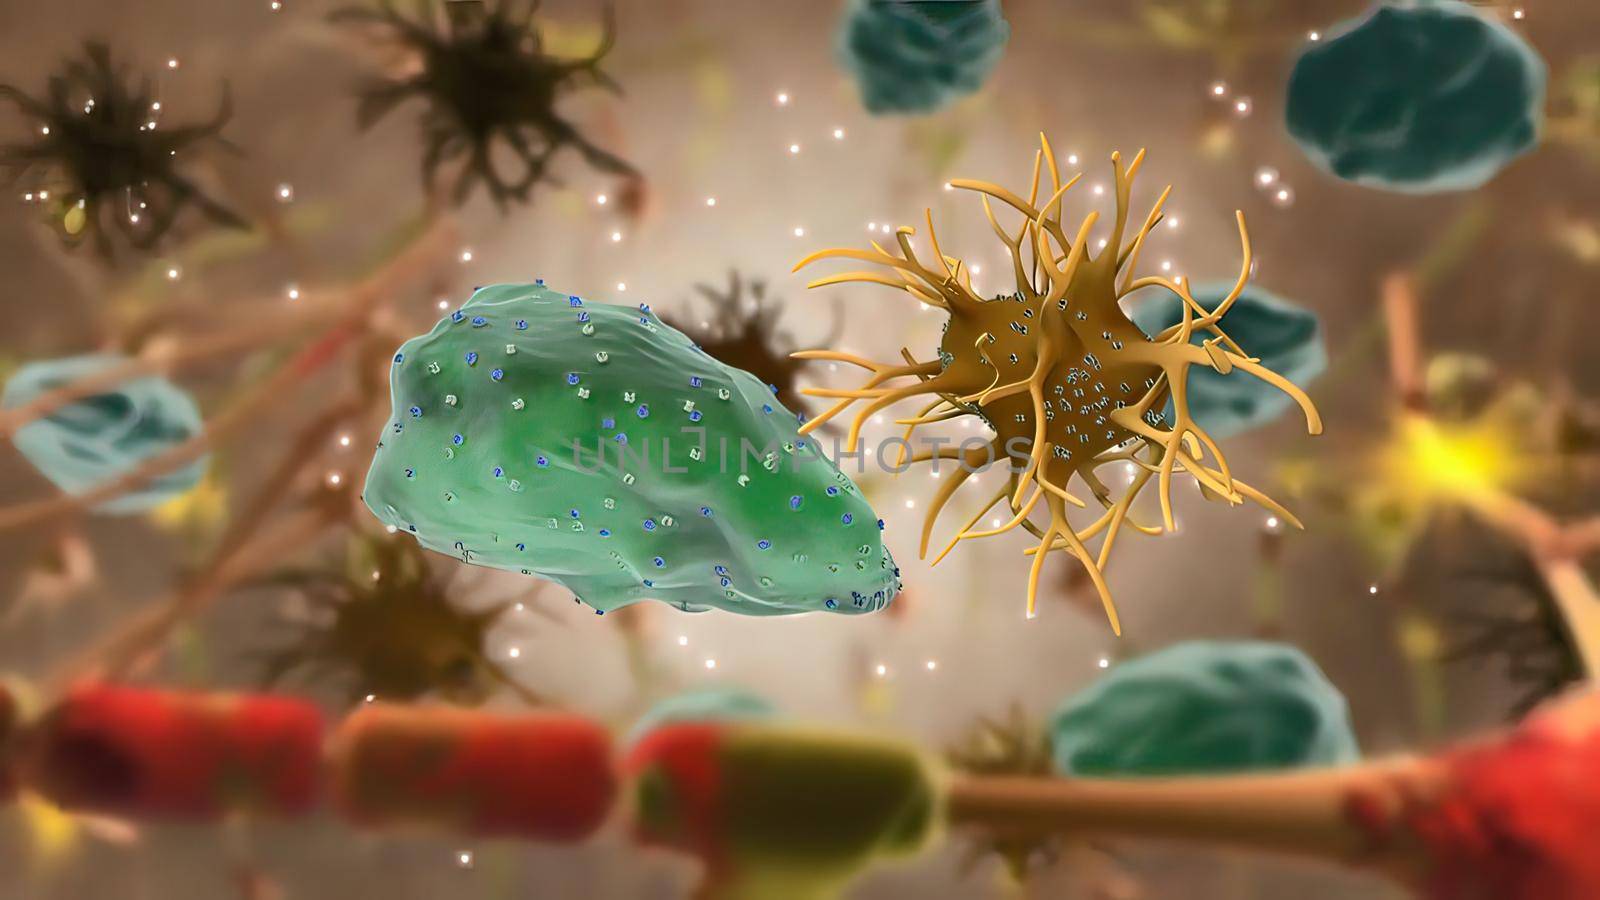 Microglia and macrophages of the central nervous system.The contribution of microglia priming and systemic inflammation to chronic neurodegeneration 3D illustration